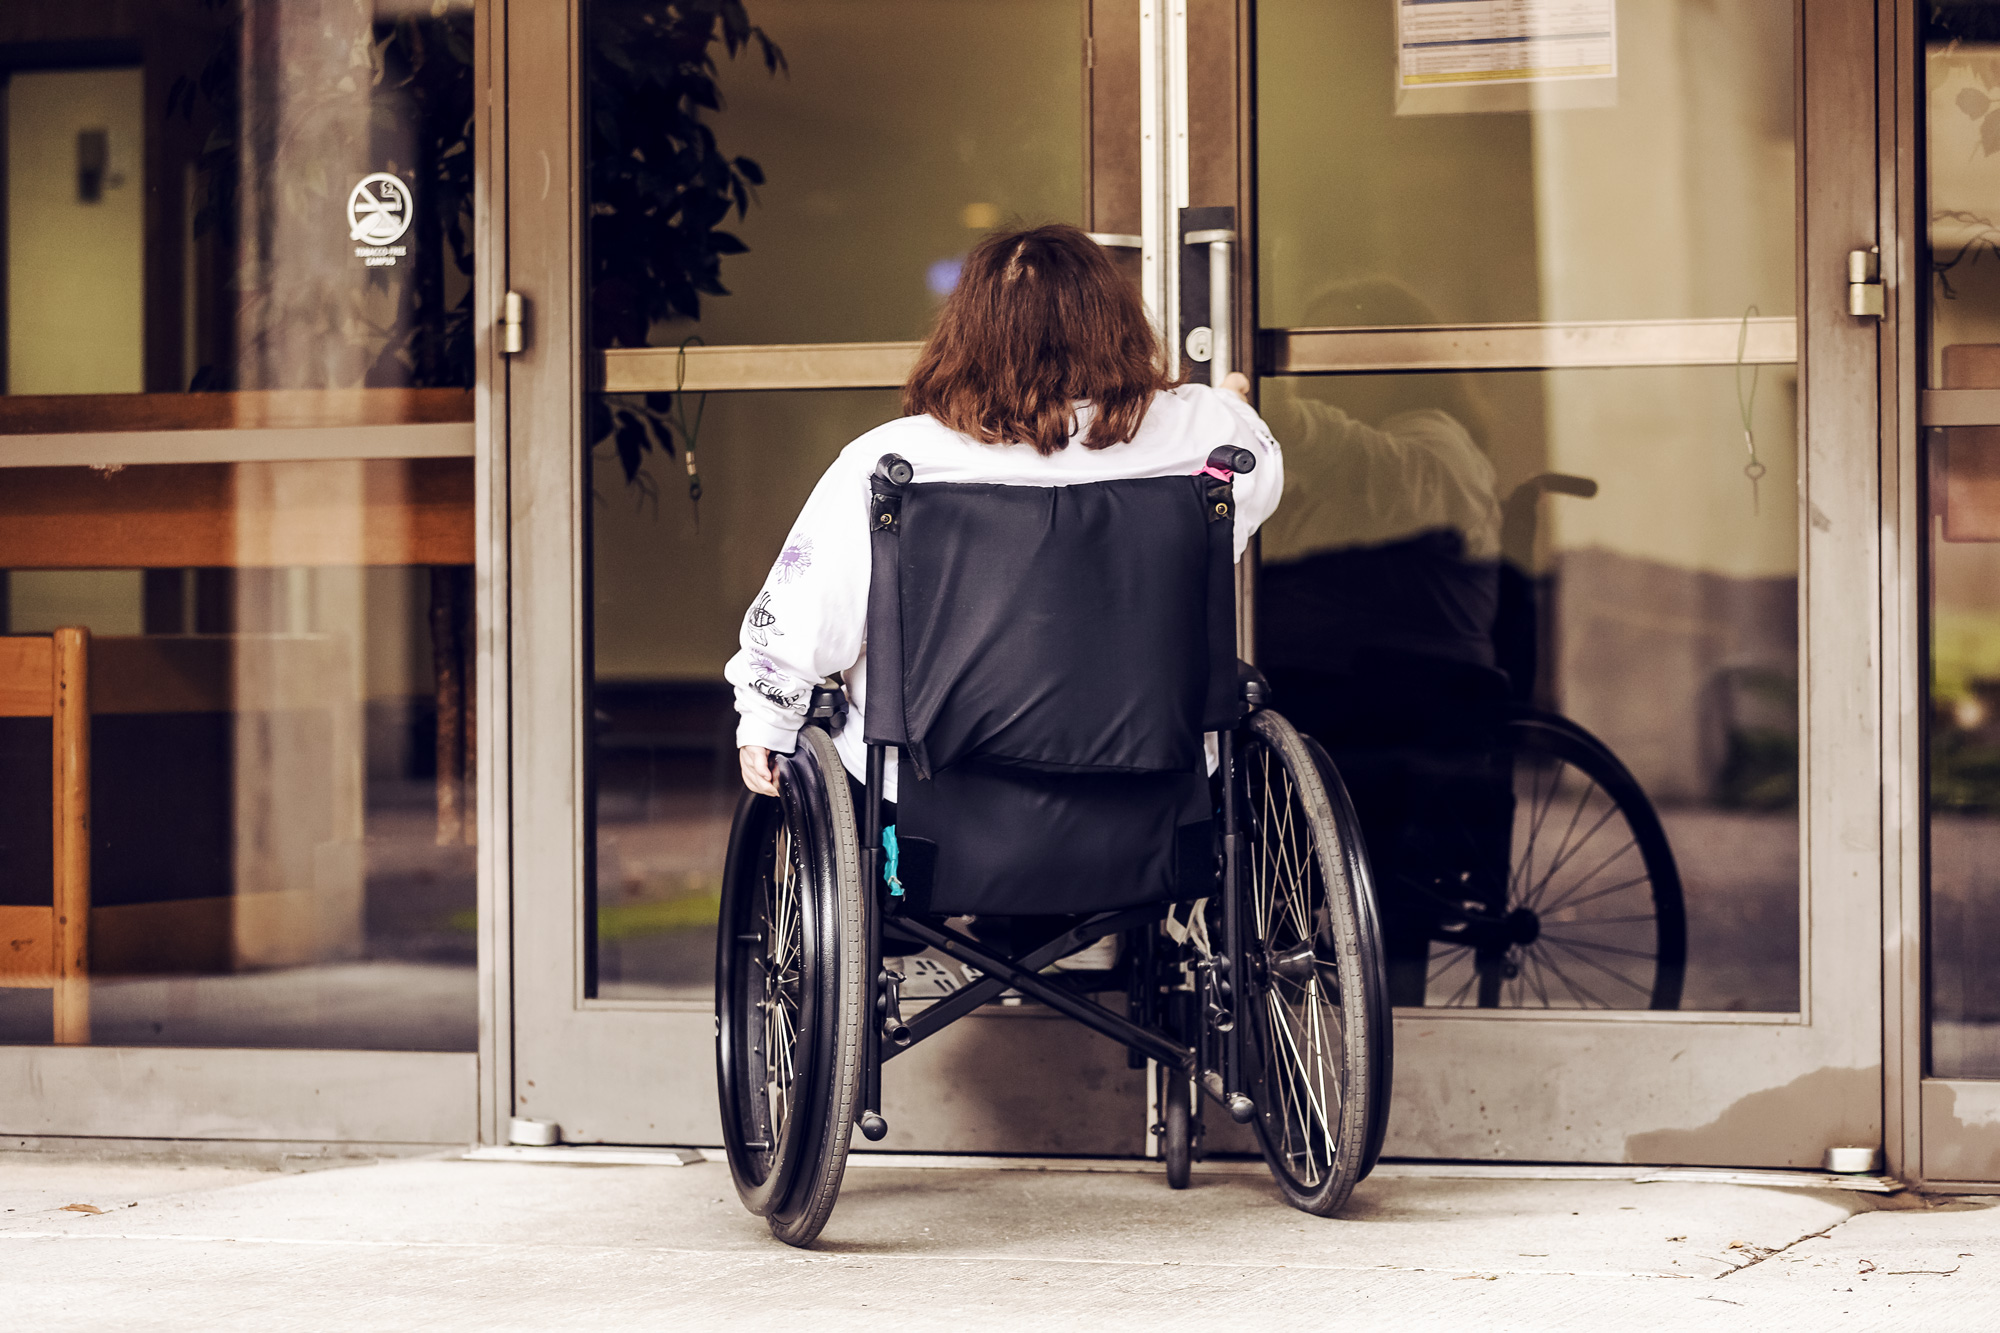 Photo capturing someone in a wheelchair trying to pull open non-automatic doors to show accessibility issues on the campus.